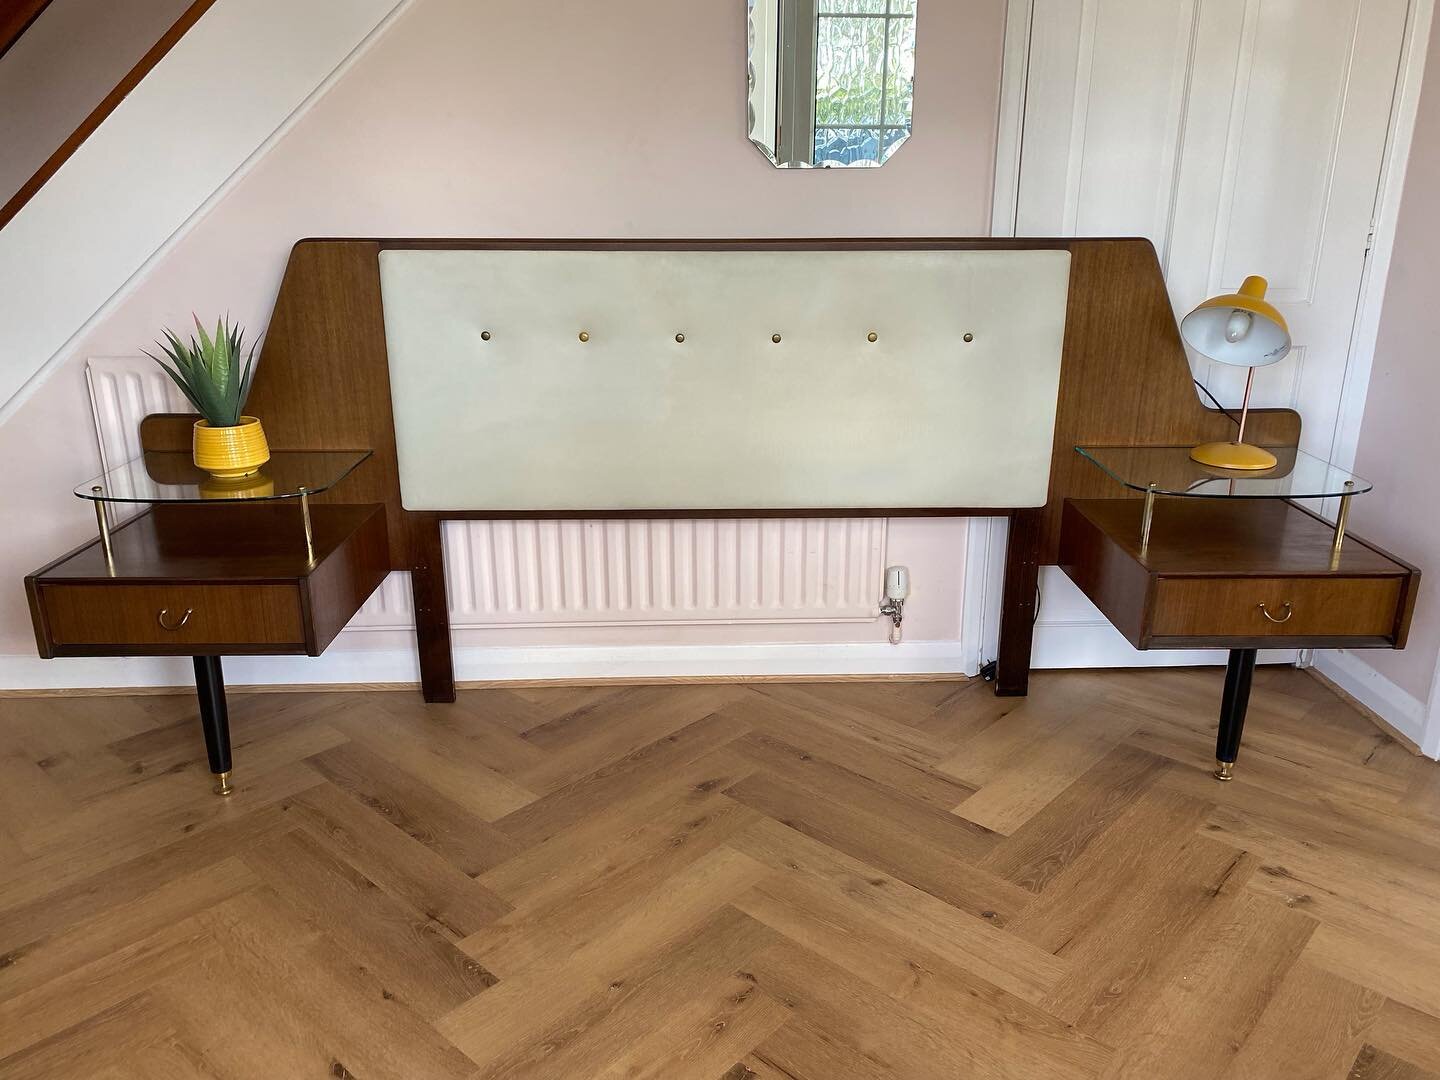 I picked up this lovely G Plan E Gomme Librenza headboard unit in beautiful African tola wood. It even comes with the original assembly instructions which makes it all the more special. 

It needed quite a lot restoration, which I am finishing off at